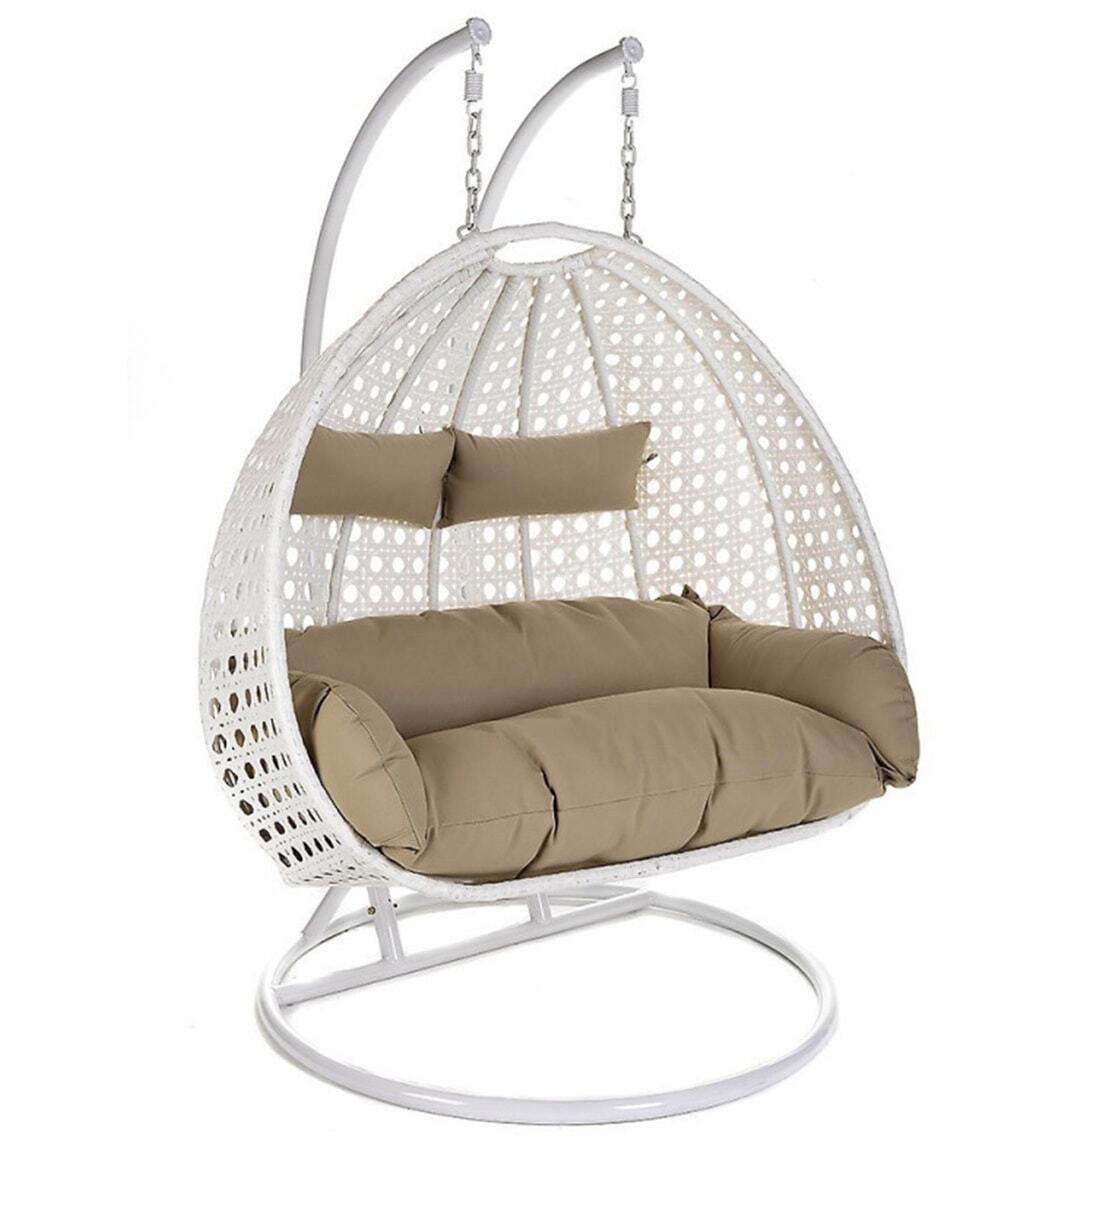 Dreamline Outdoor Furniture Double Seater Hanging Swing With Stand For Balcony , Garden Swing (White)